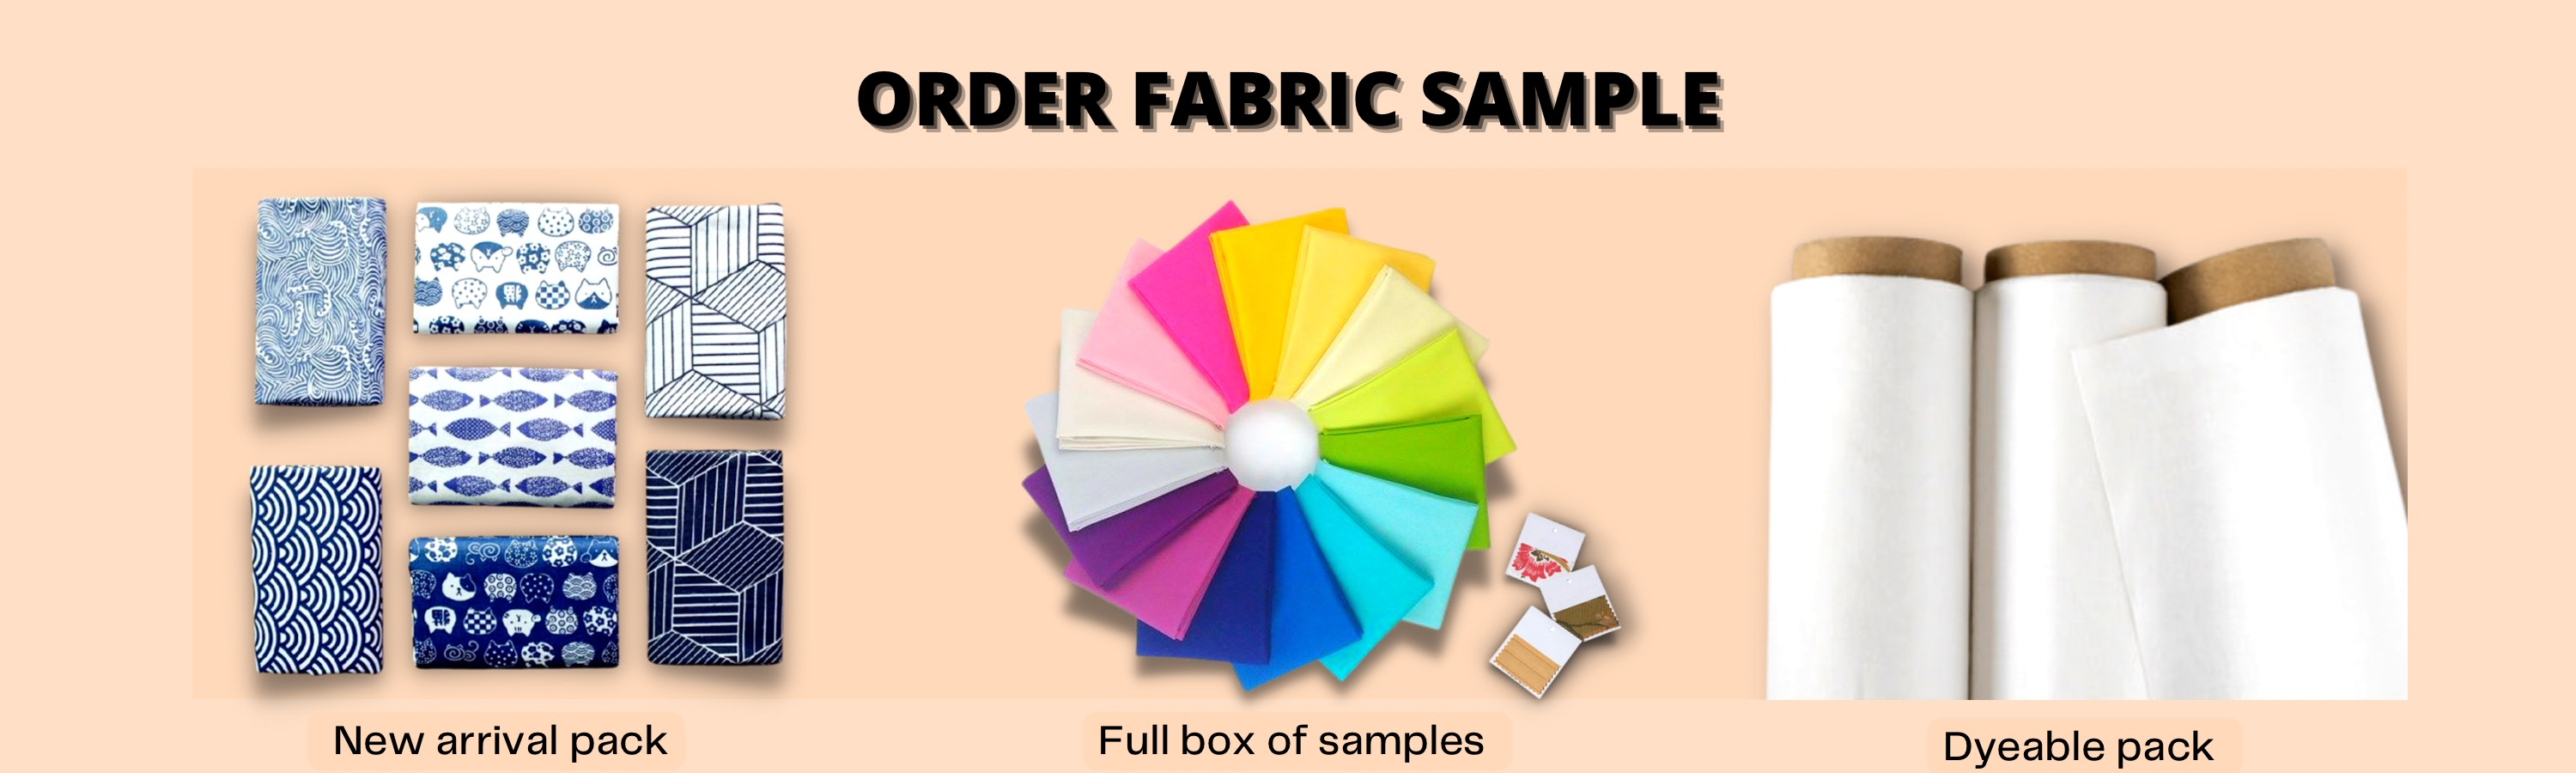 Dyeable Sample Pack